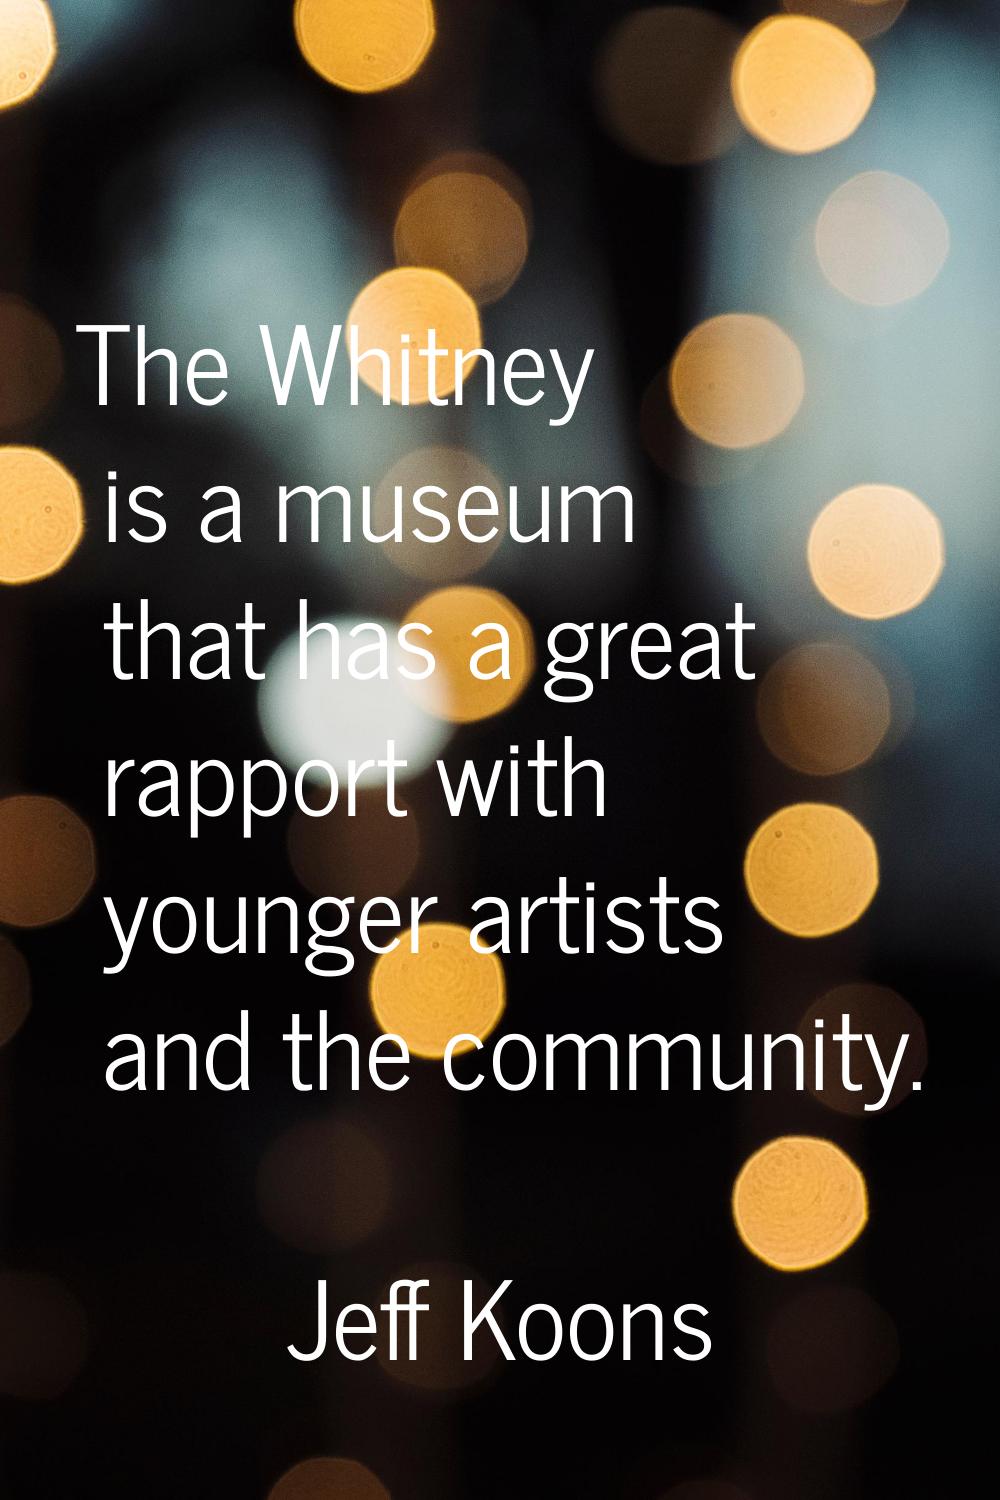 The Whitney is a museum that has a great rapport with younger artists and the community.